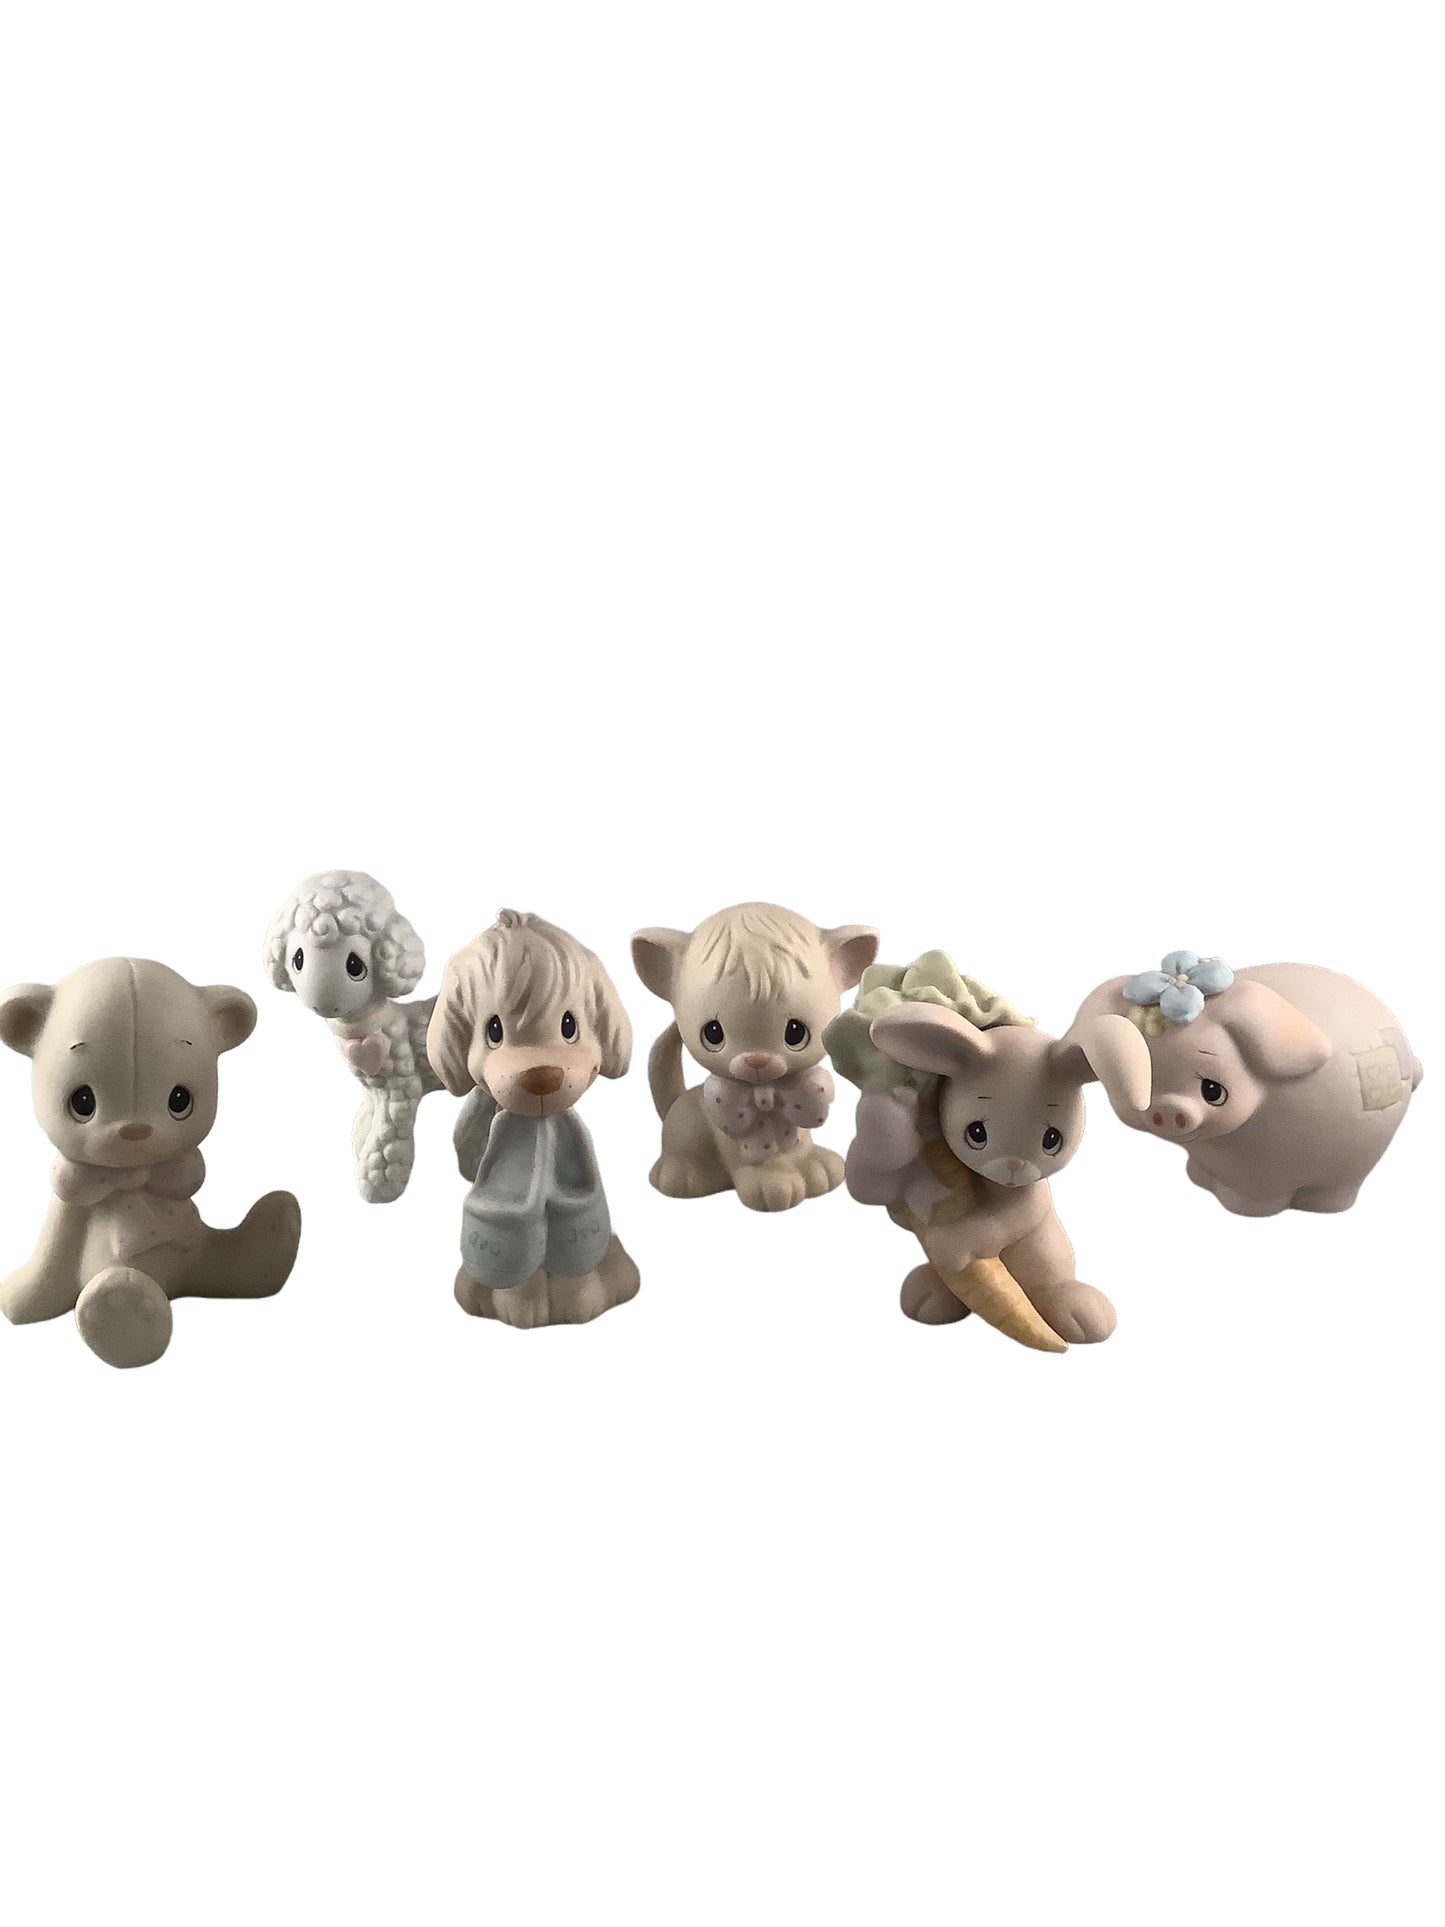 Animal Collection - Precious Moments Figurines